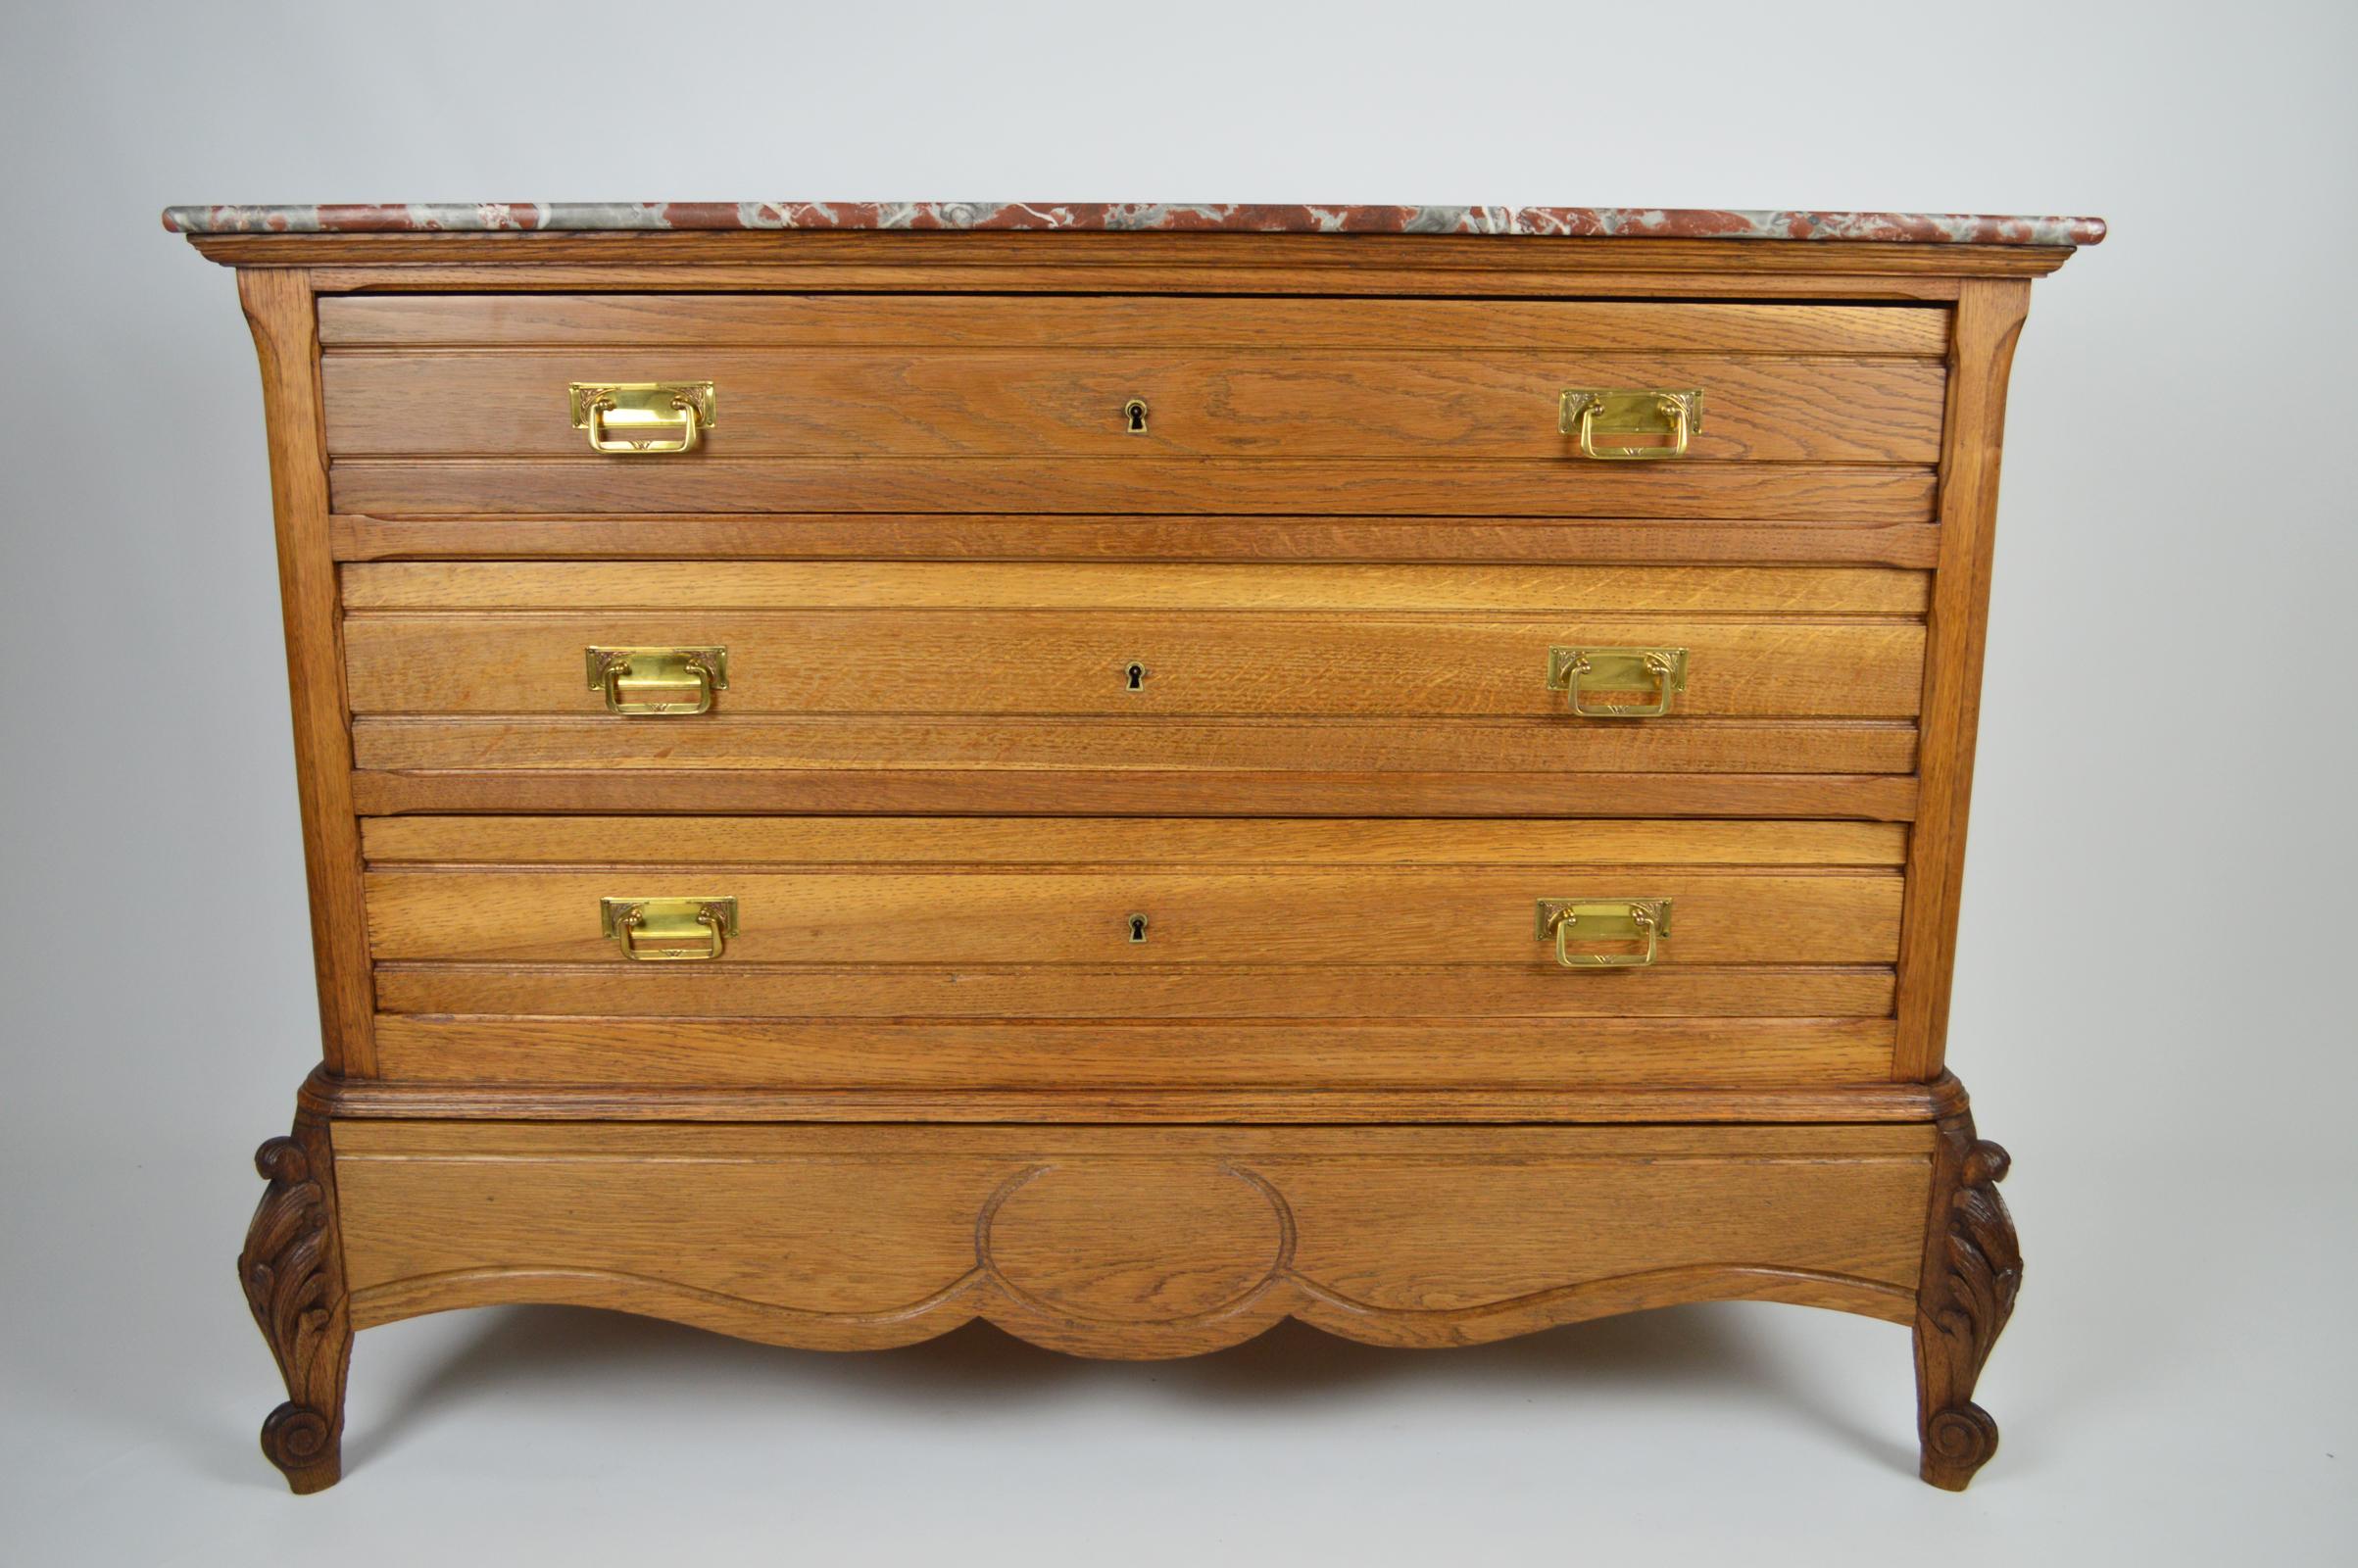 French Belle Époque Eclecticism Art Nouveau / Rococo Commode or Chest of Drawers, 1910s For Sale